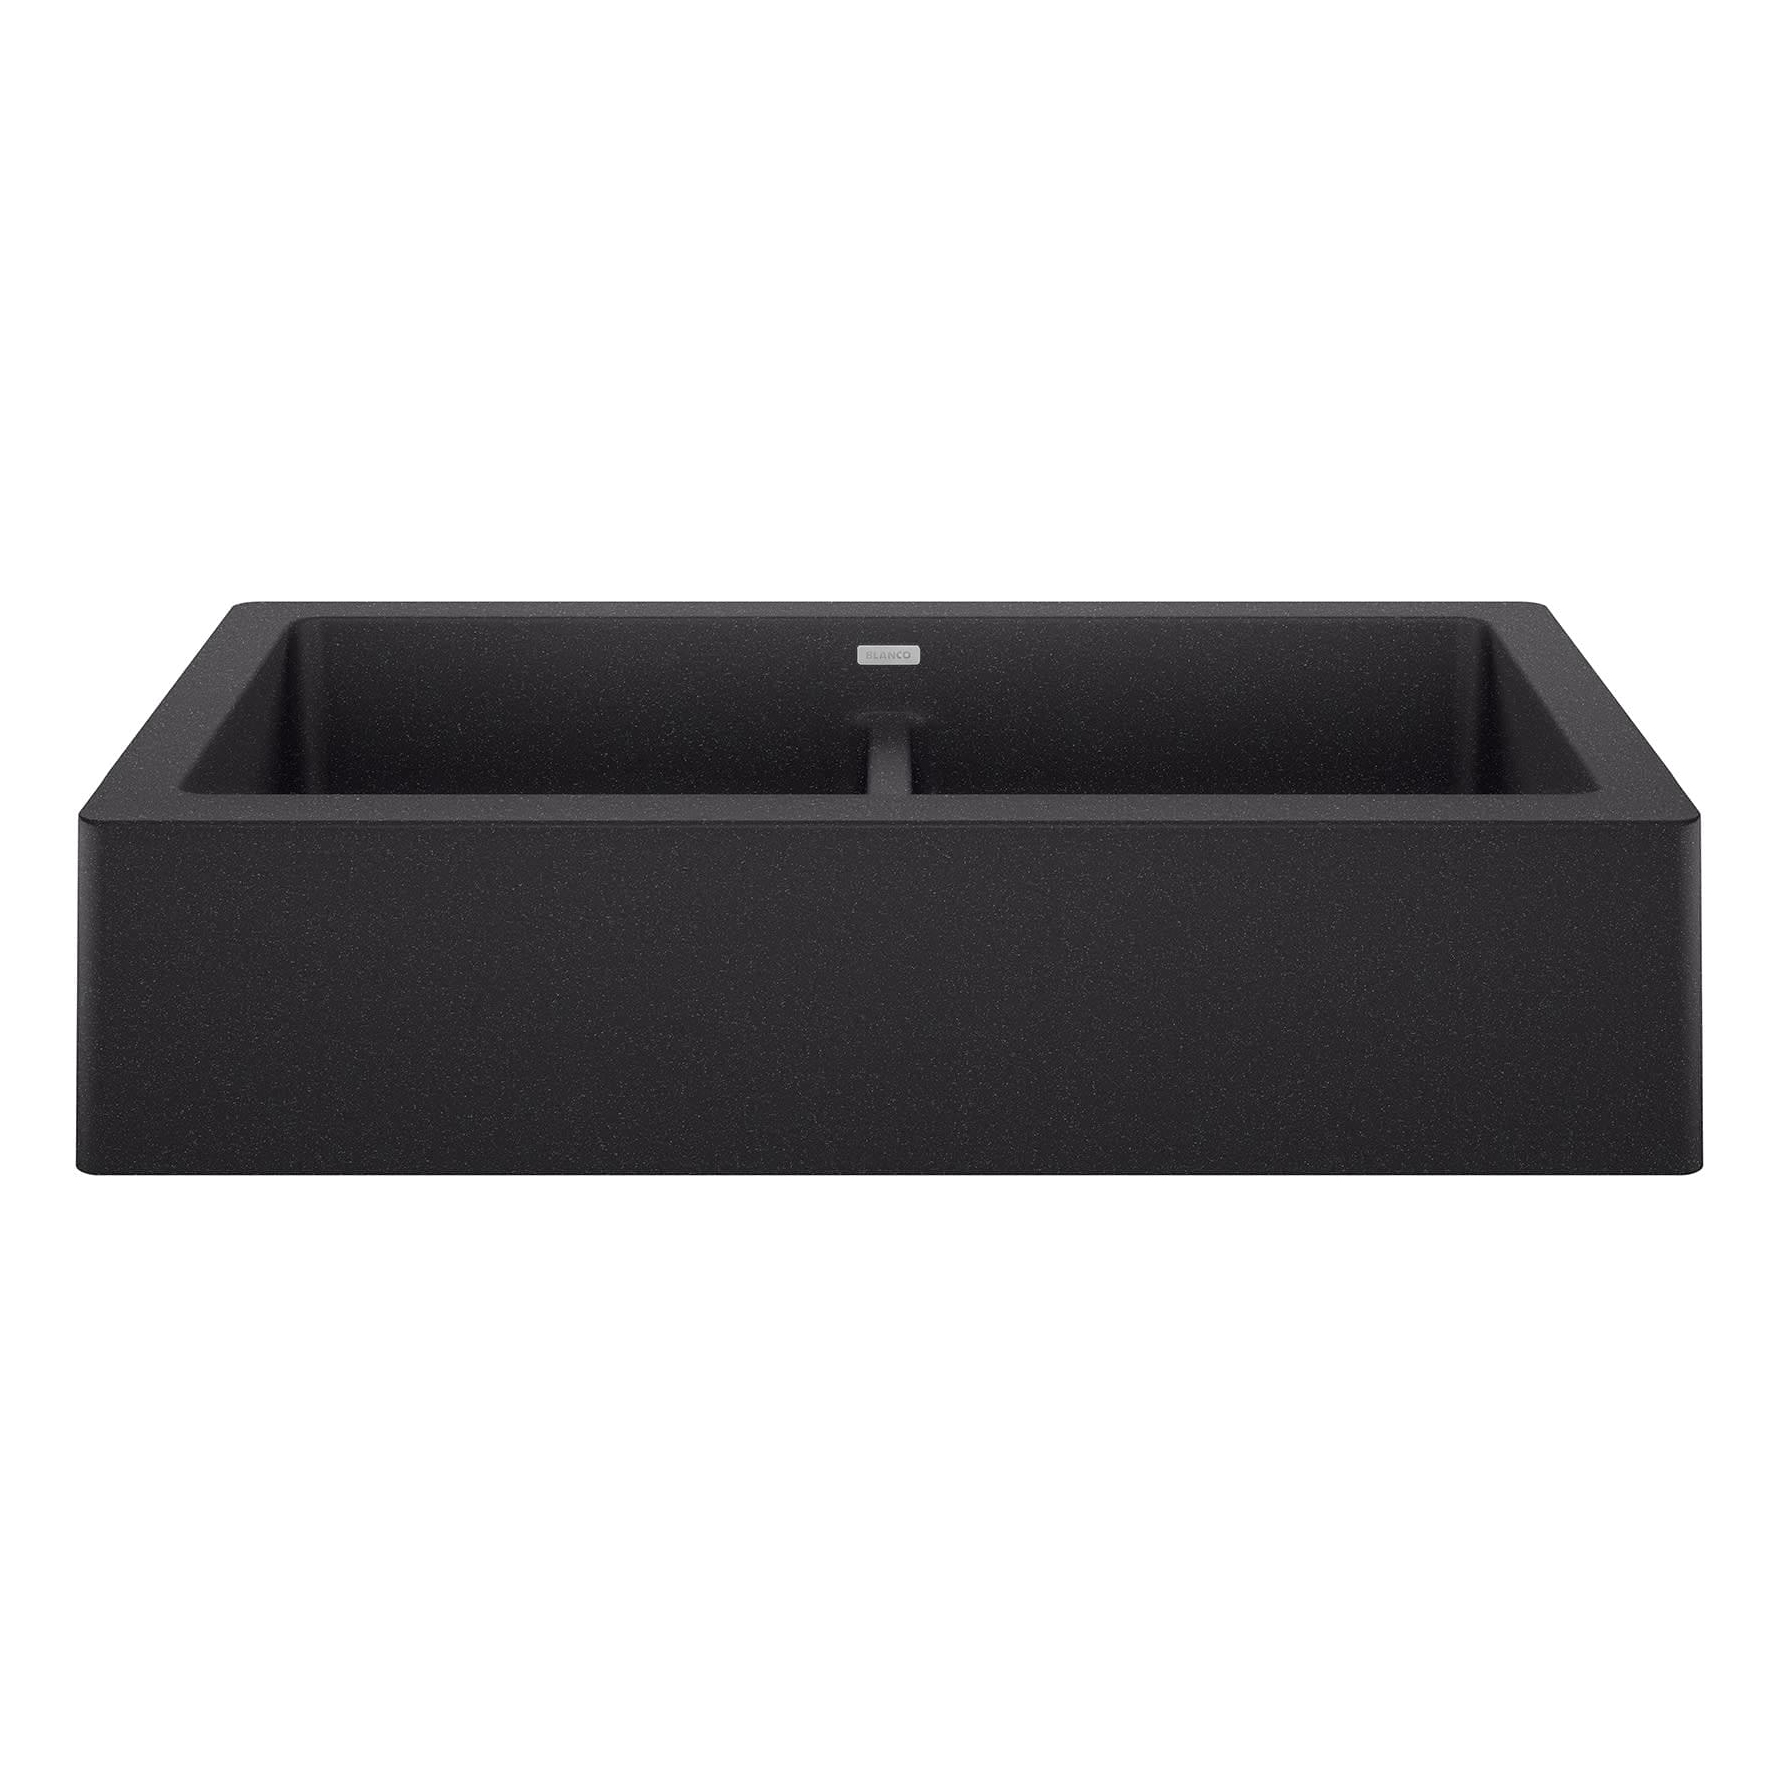 Vintera 32-13/16X19X9" Apron Front 2-Bowl Sink in Anthracite